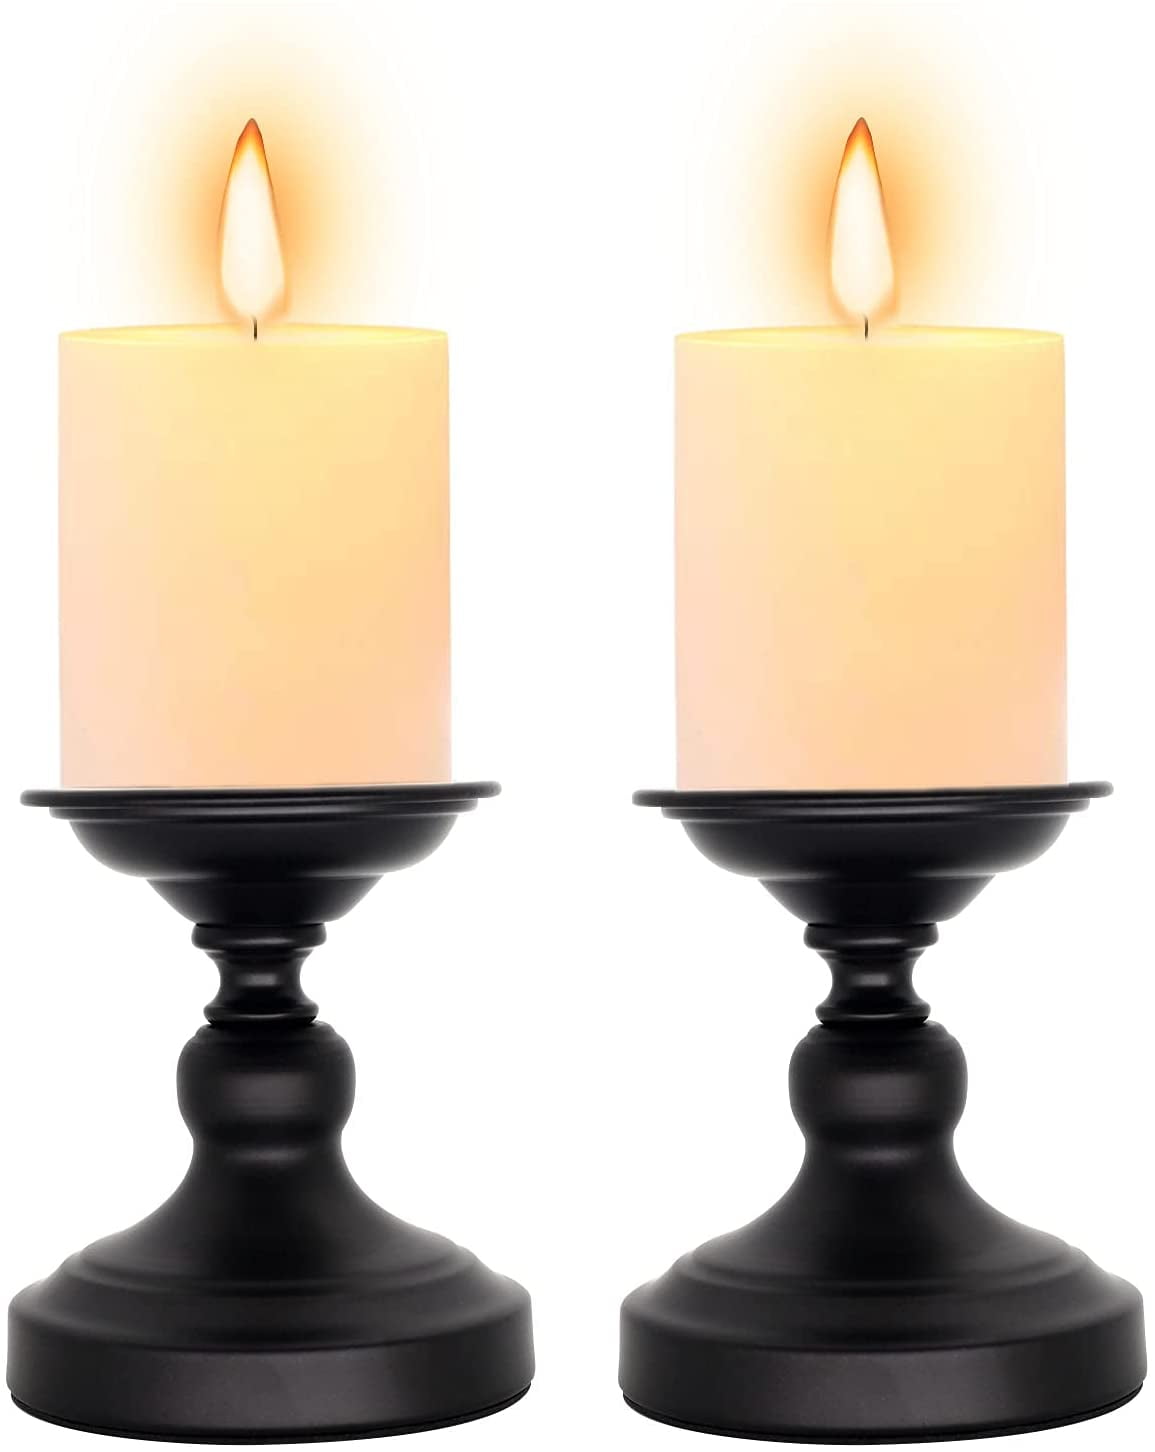 2 Pcs Nuptio Candlestick Holders Taper Candle Holder Wedding Housewarming Birthday Gifts Geometric Candle Holder Dining Table Candle Centrepiece Decorations for Living Room Bedroom Bathroom